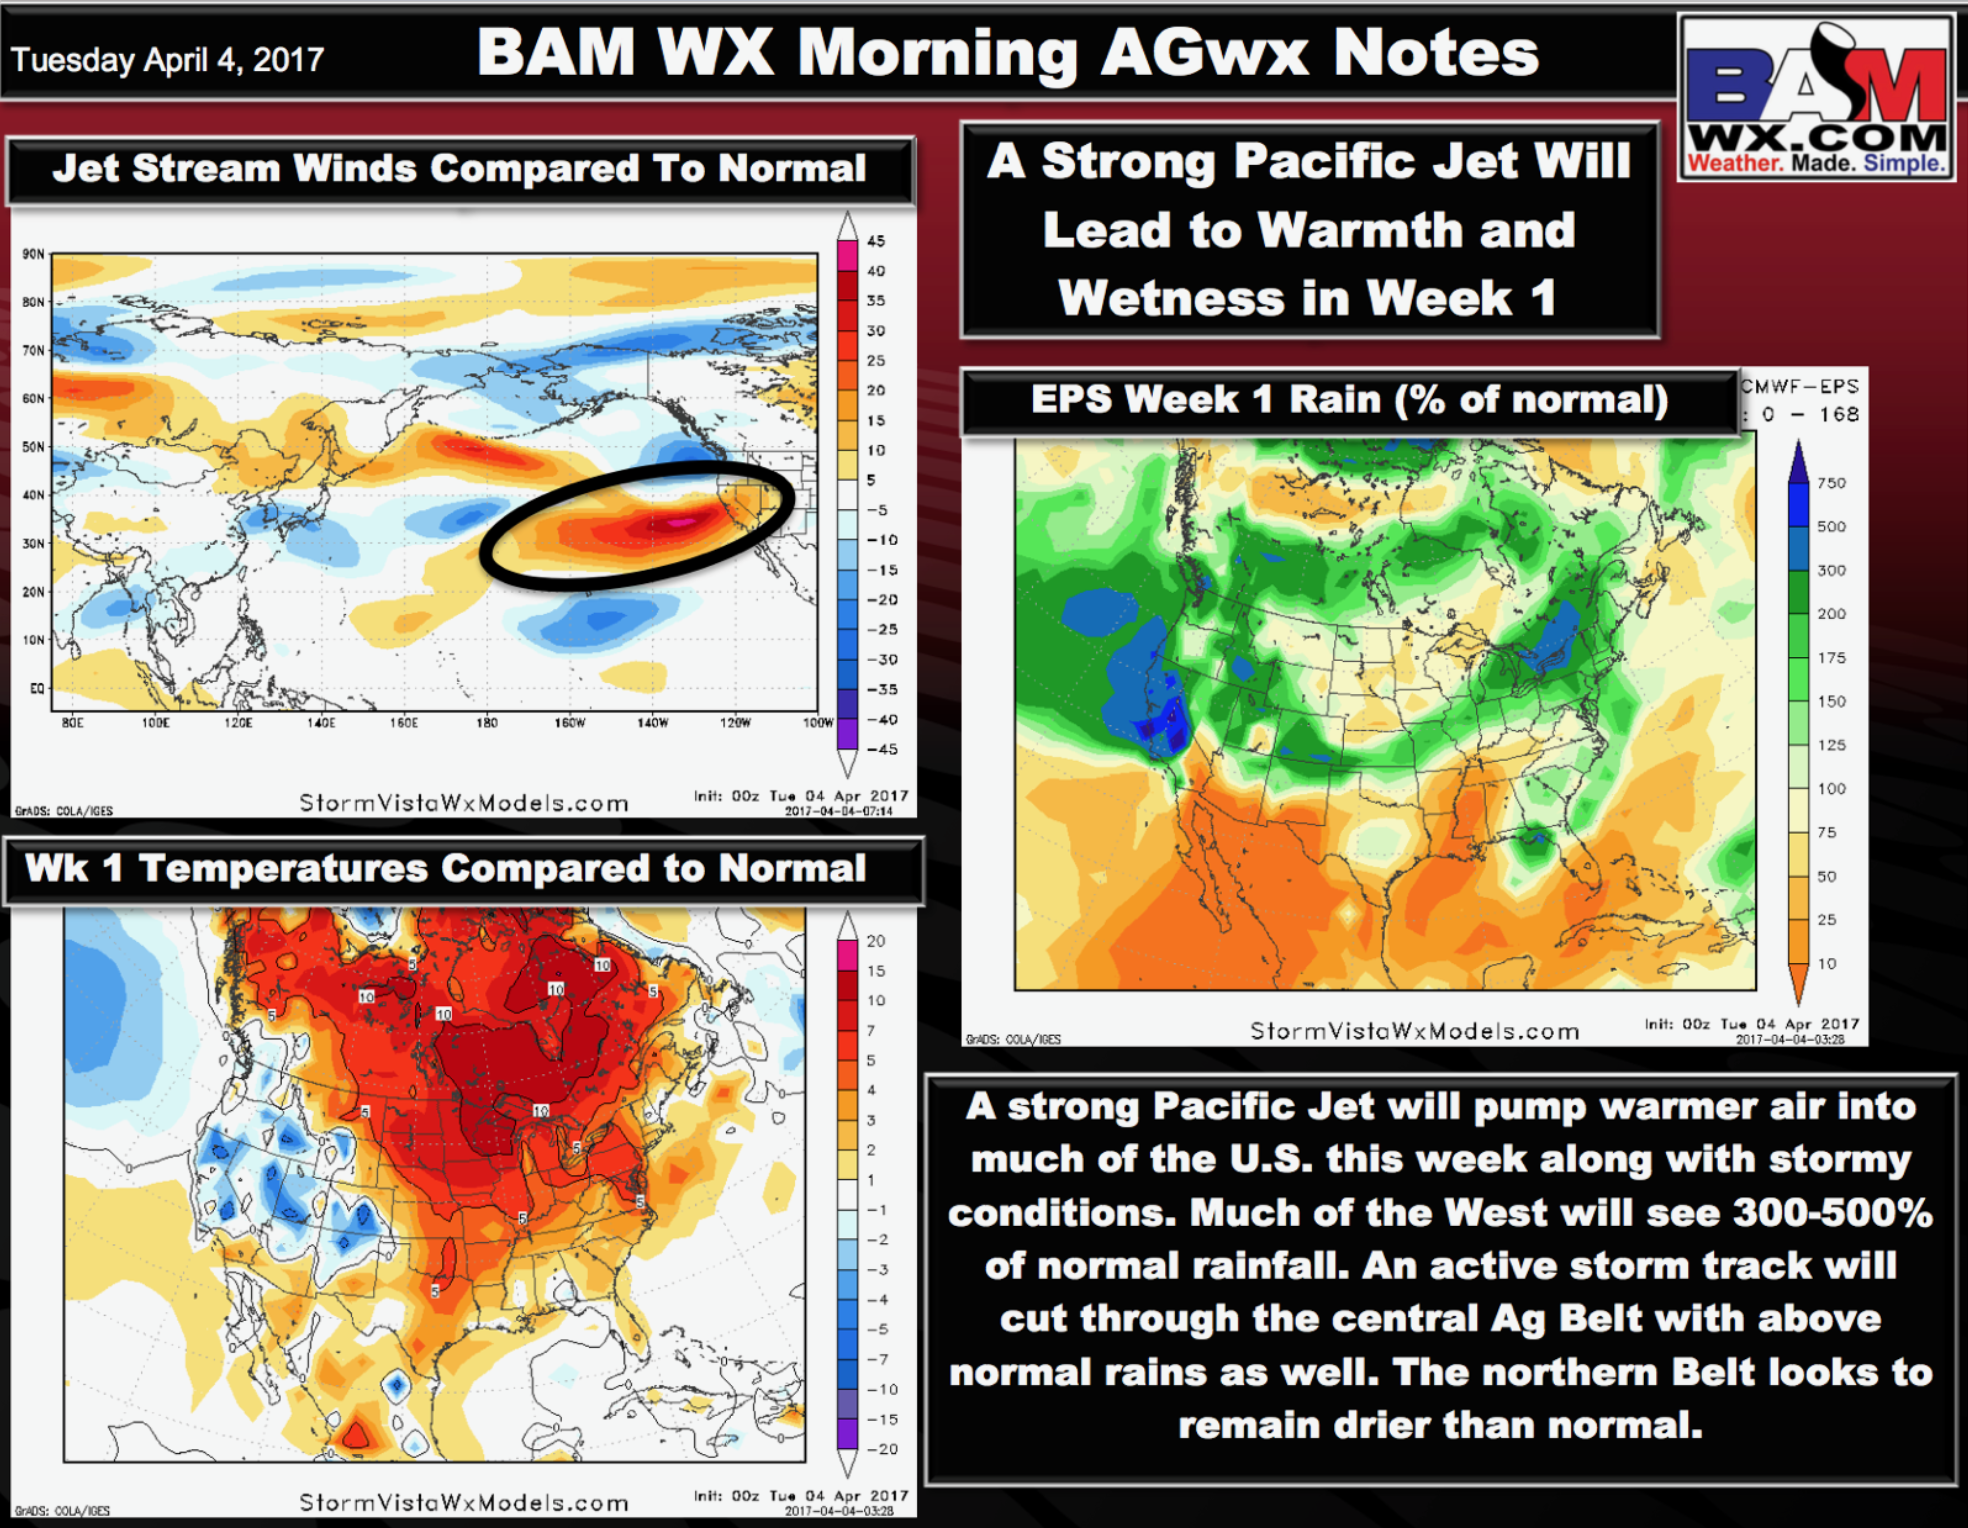 #AGwx #Plant17 #Energy April active pattern continues…updates on long-range as well. M.